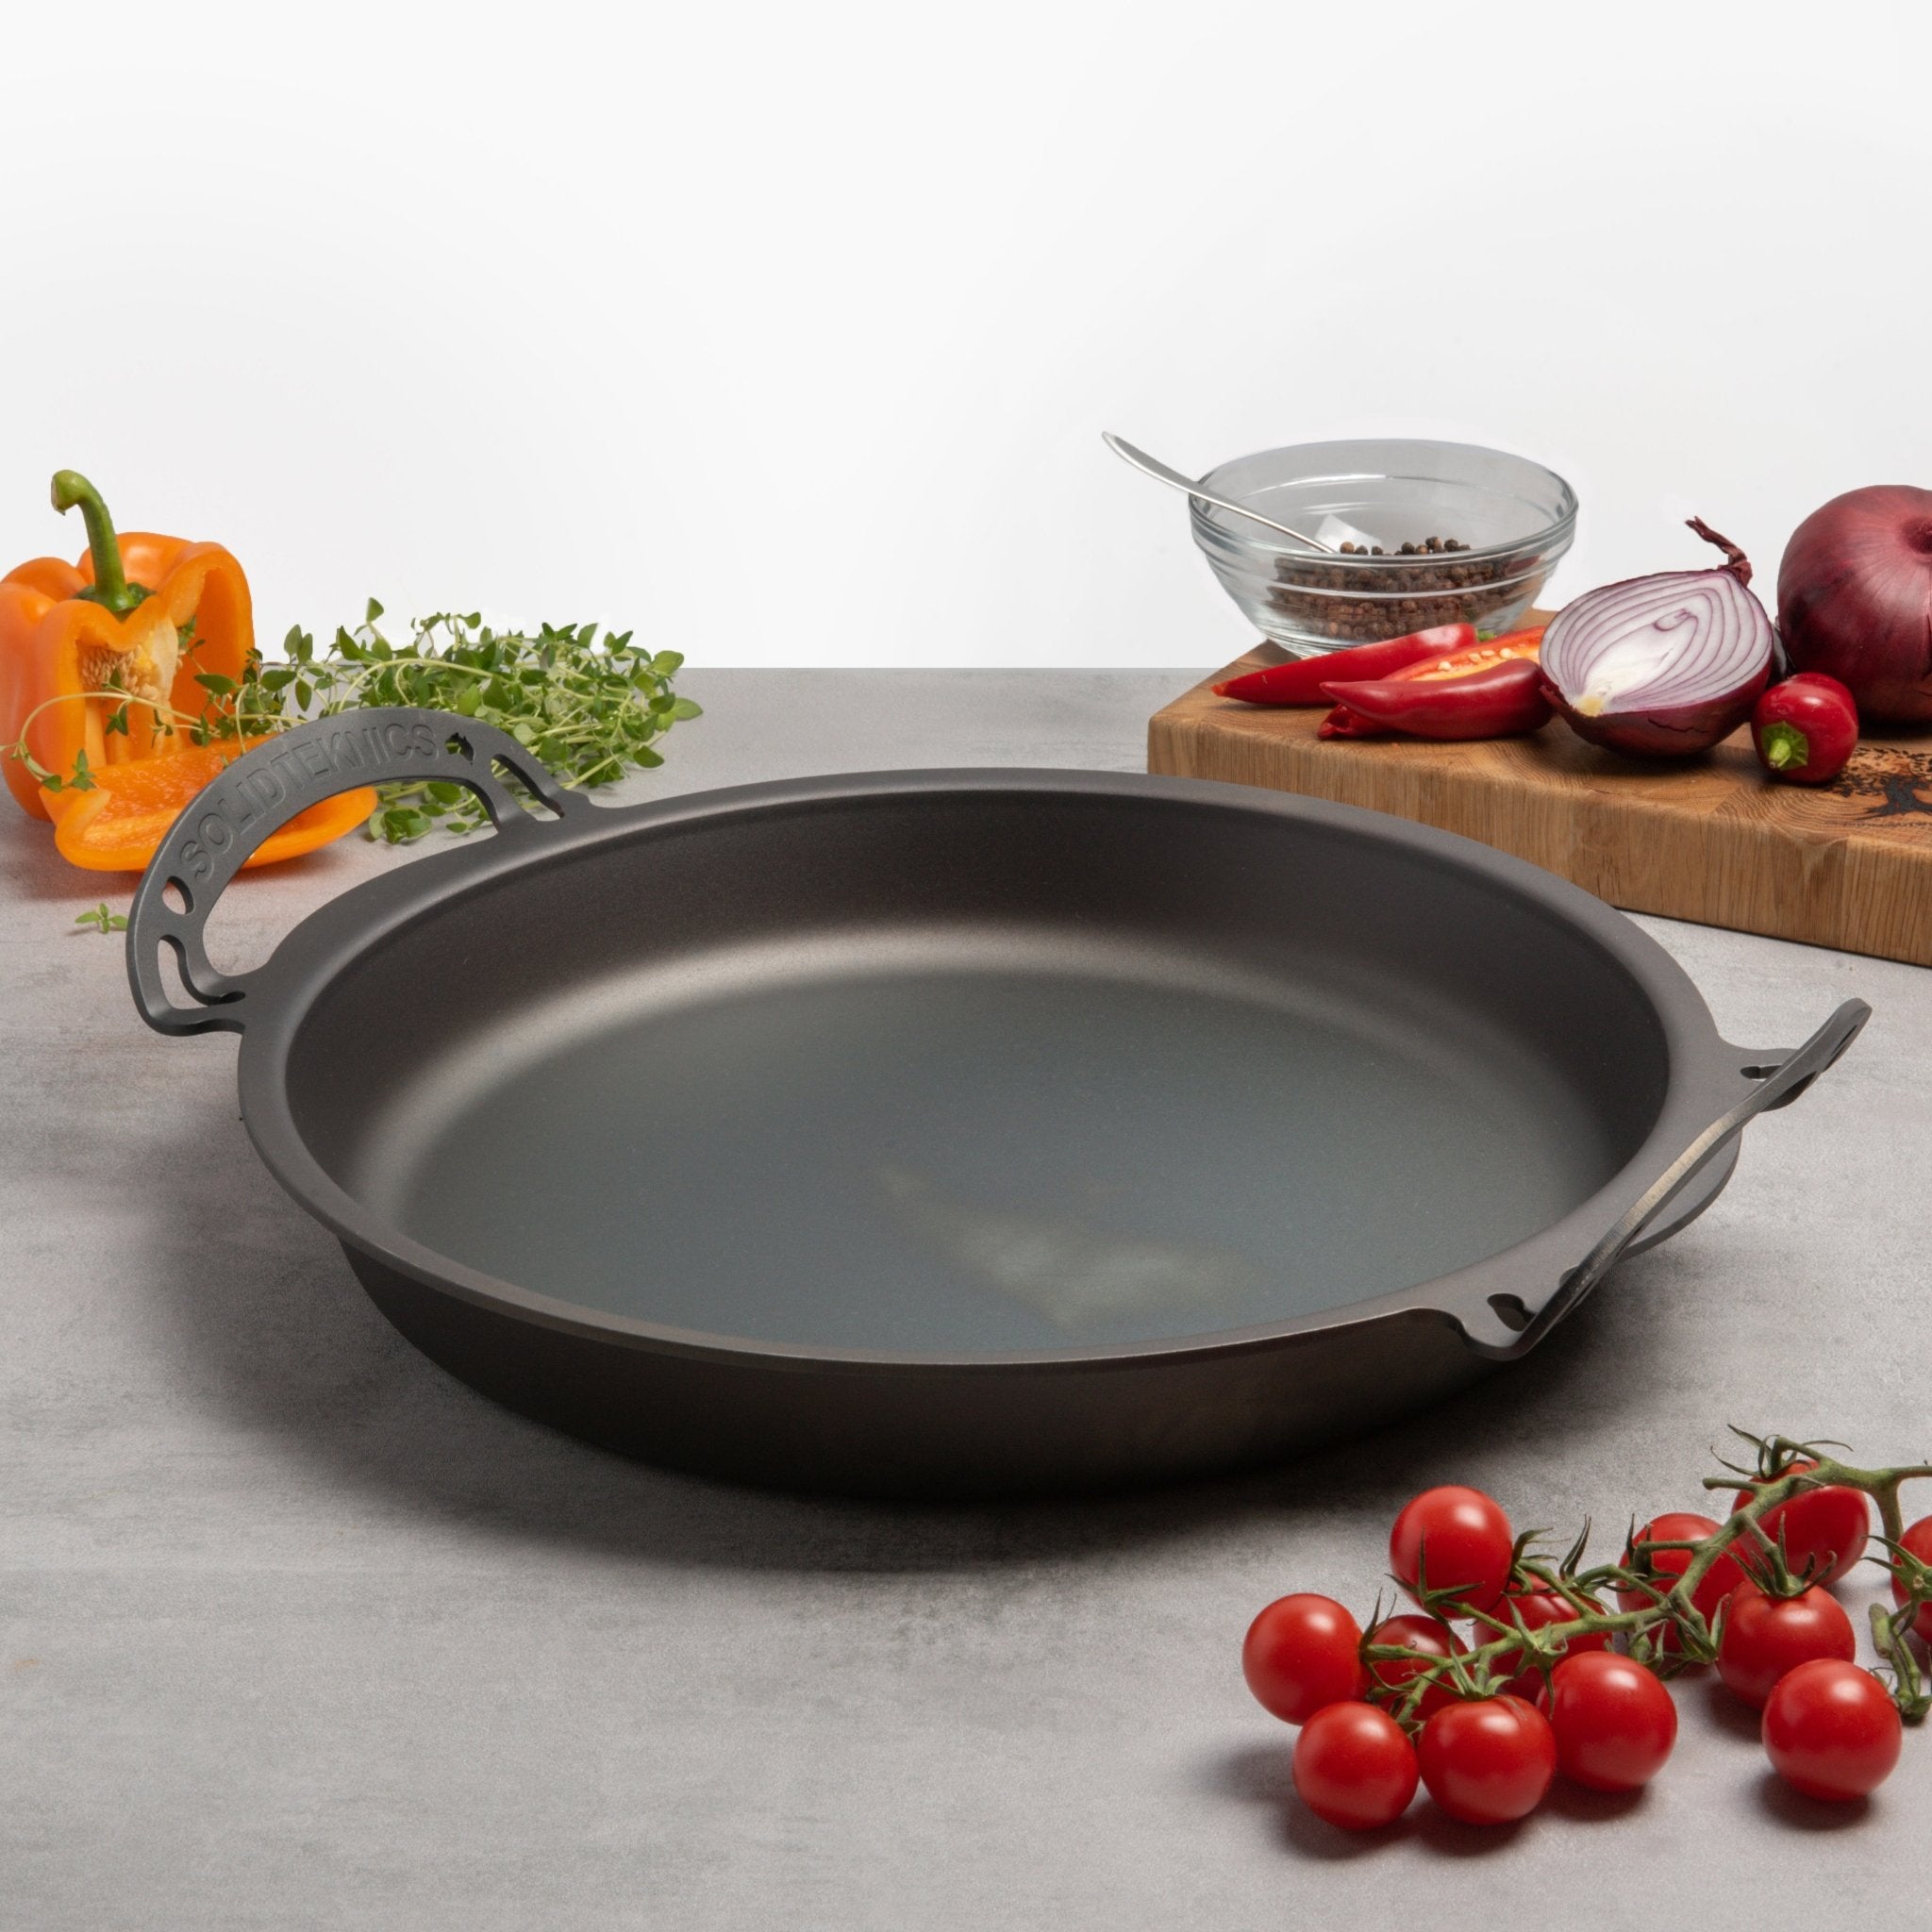 35cm Quenched Seamless Iron All-In-One Pan By Solidteknics | Size: 35cm